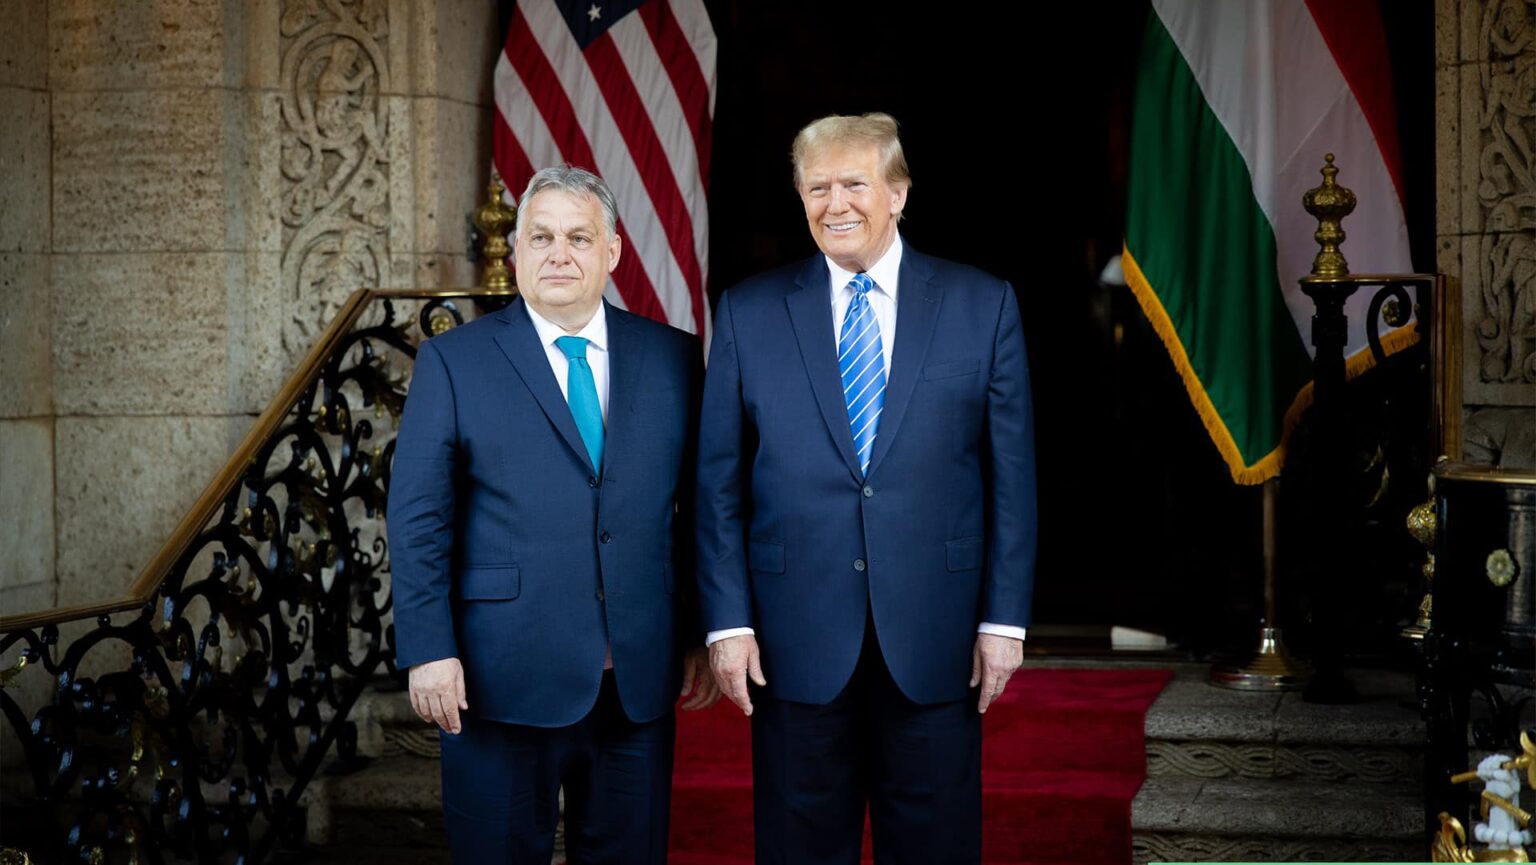 Donald Trump: ‘Orbán doesn’t want war, I don’t want war either’